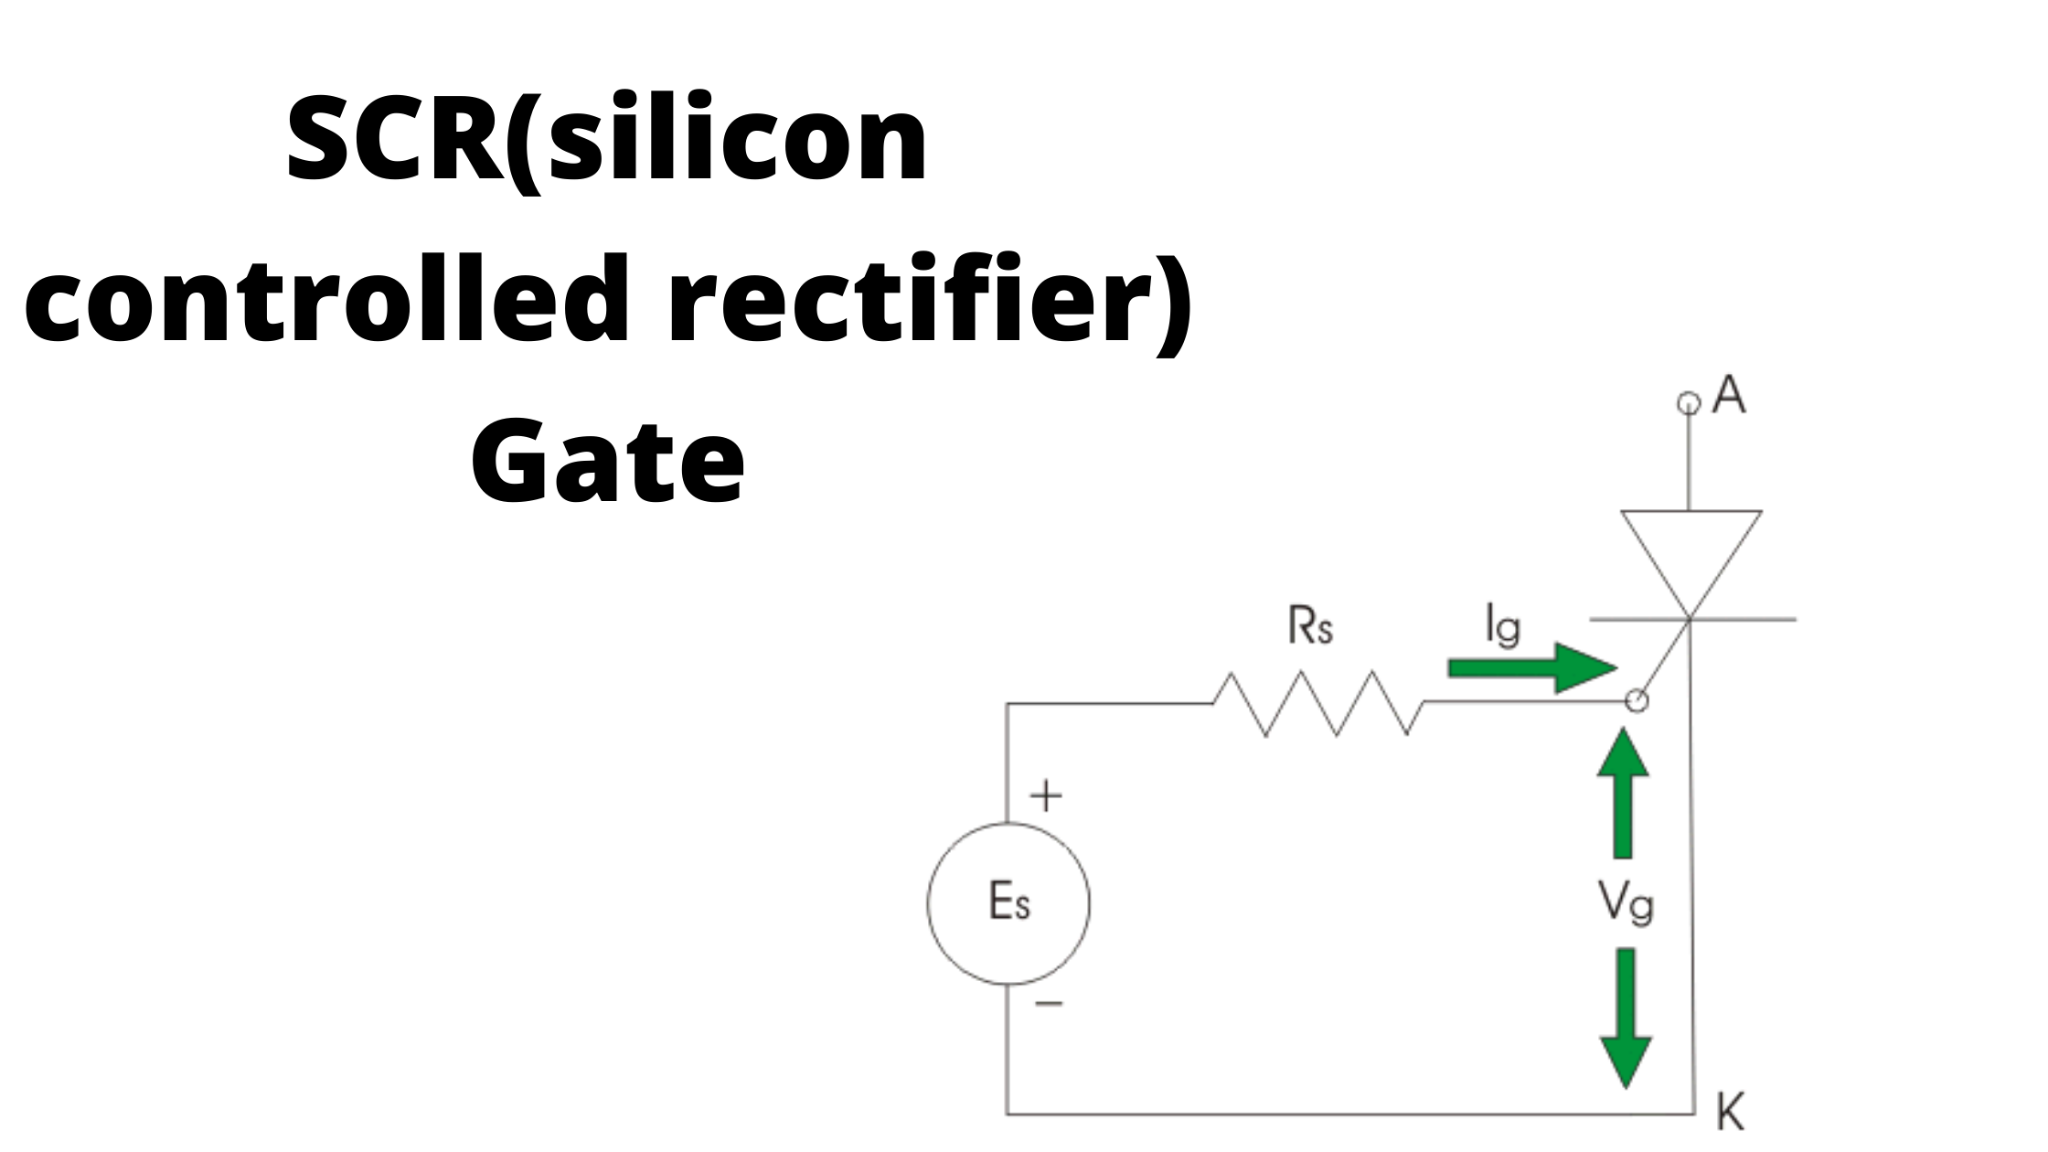 SCR(Silicon Controlled Rectifier) Gate